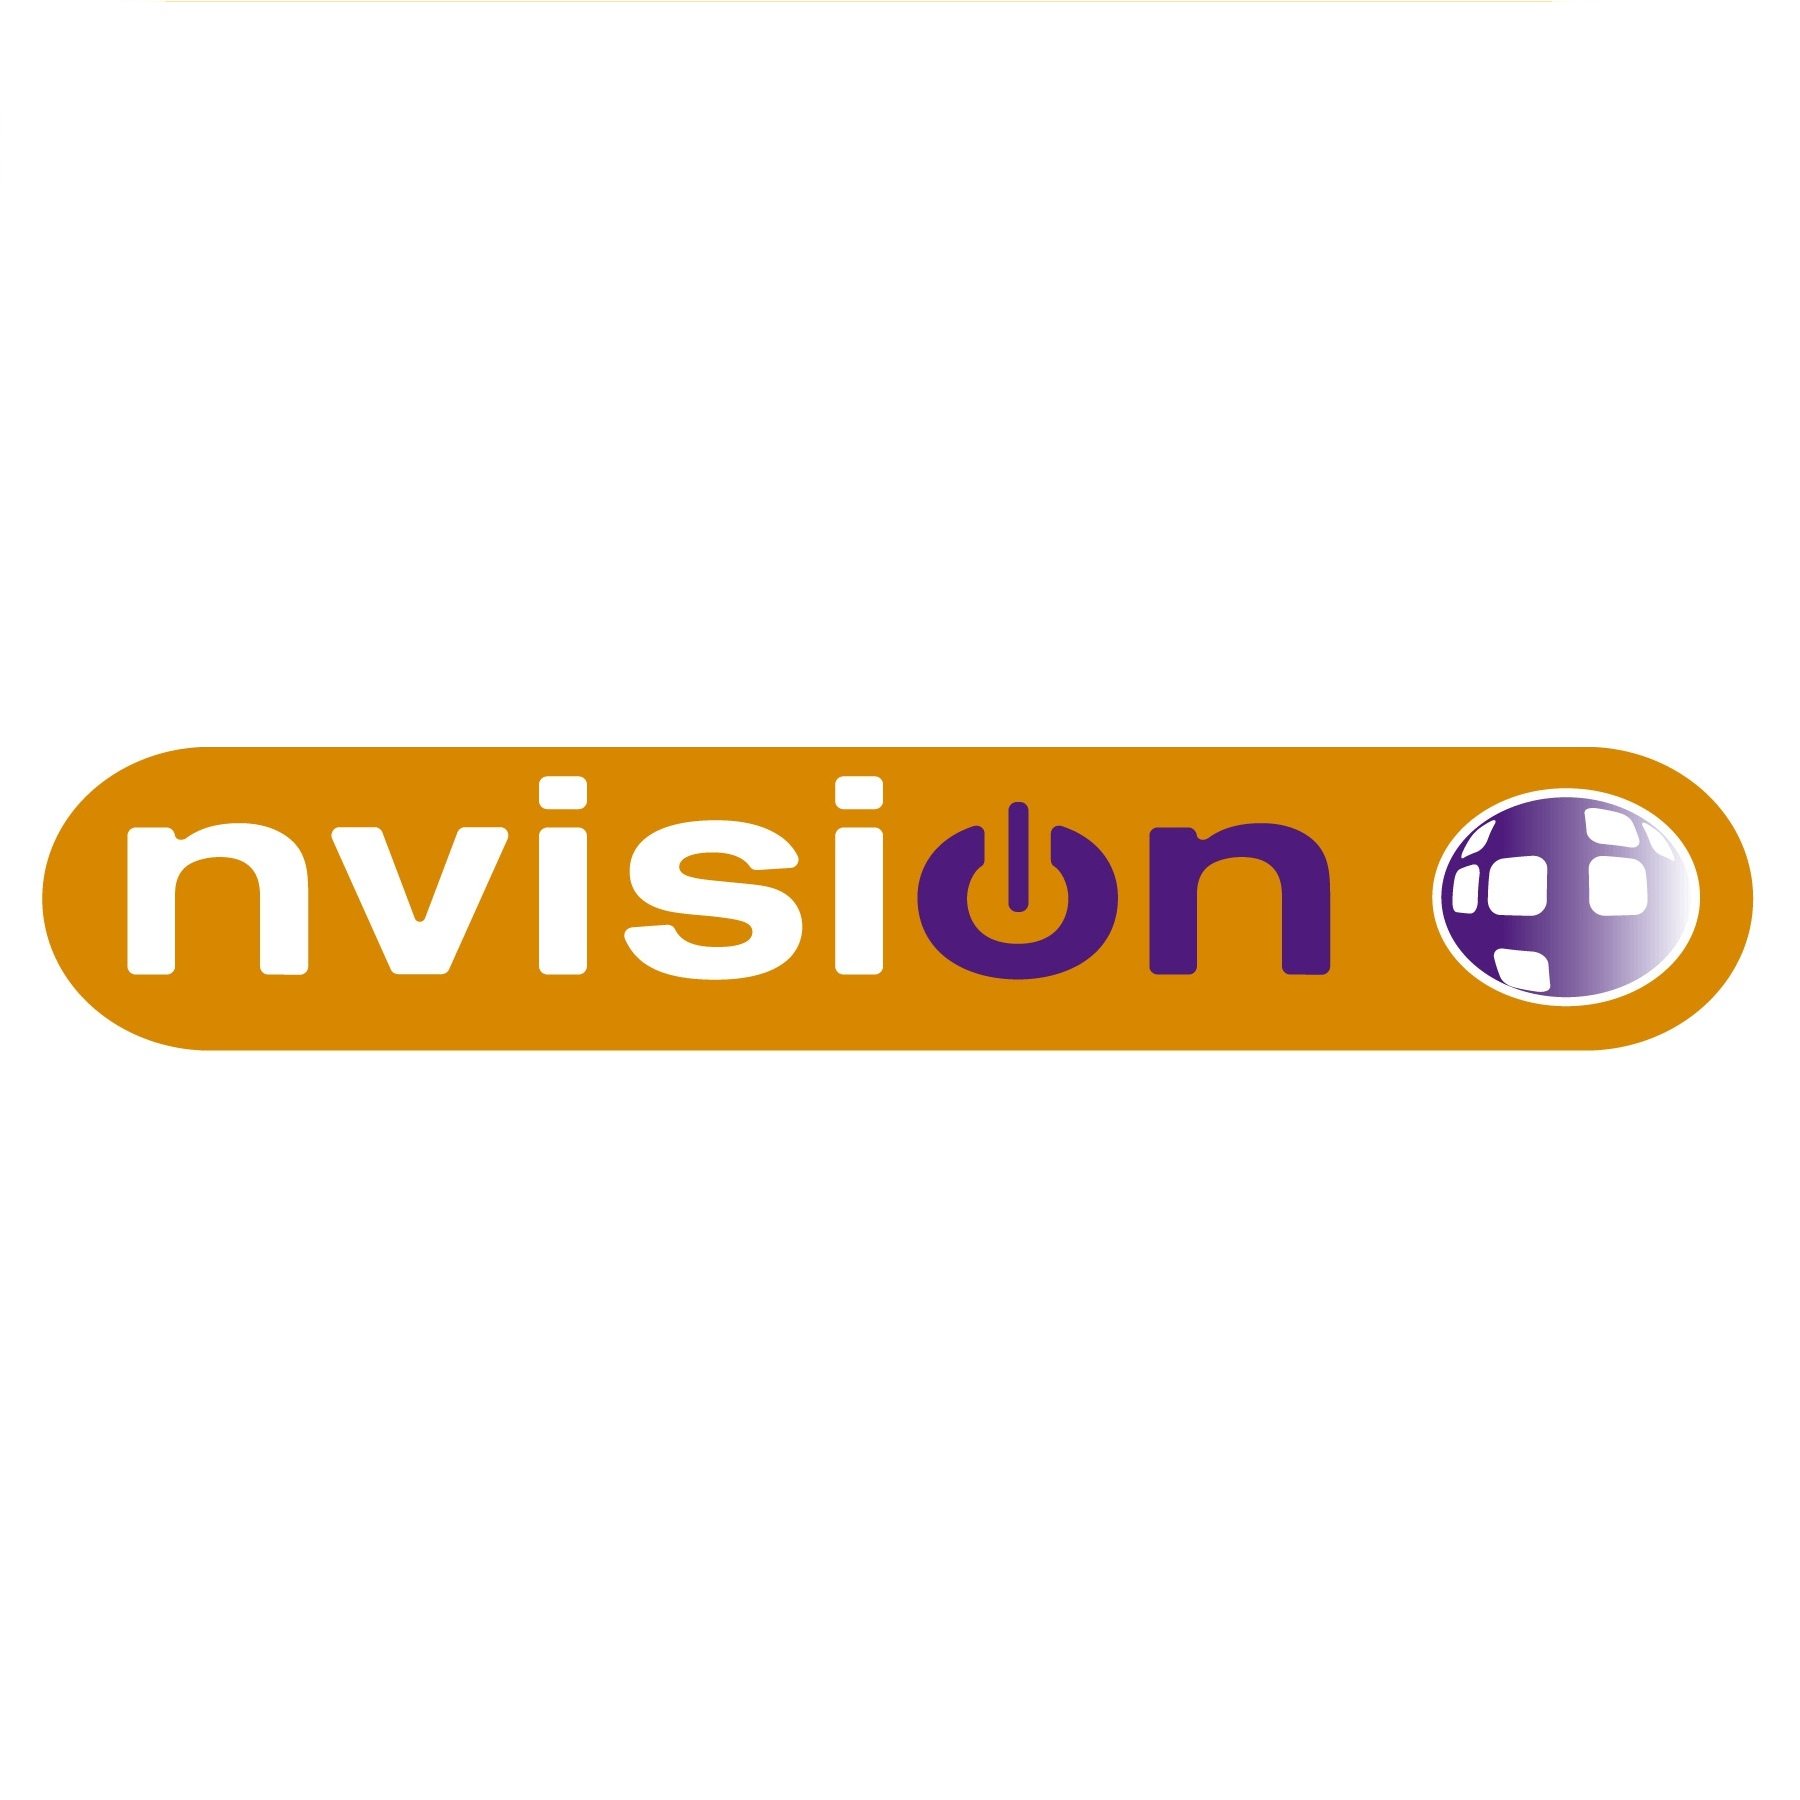 NVISION is an R&D company helping service providers to launch new services based on IoT, Artificial Intelligence and innovative technologies & business models